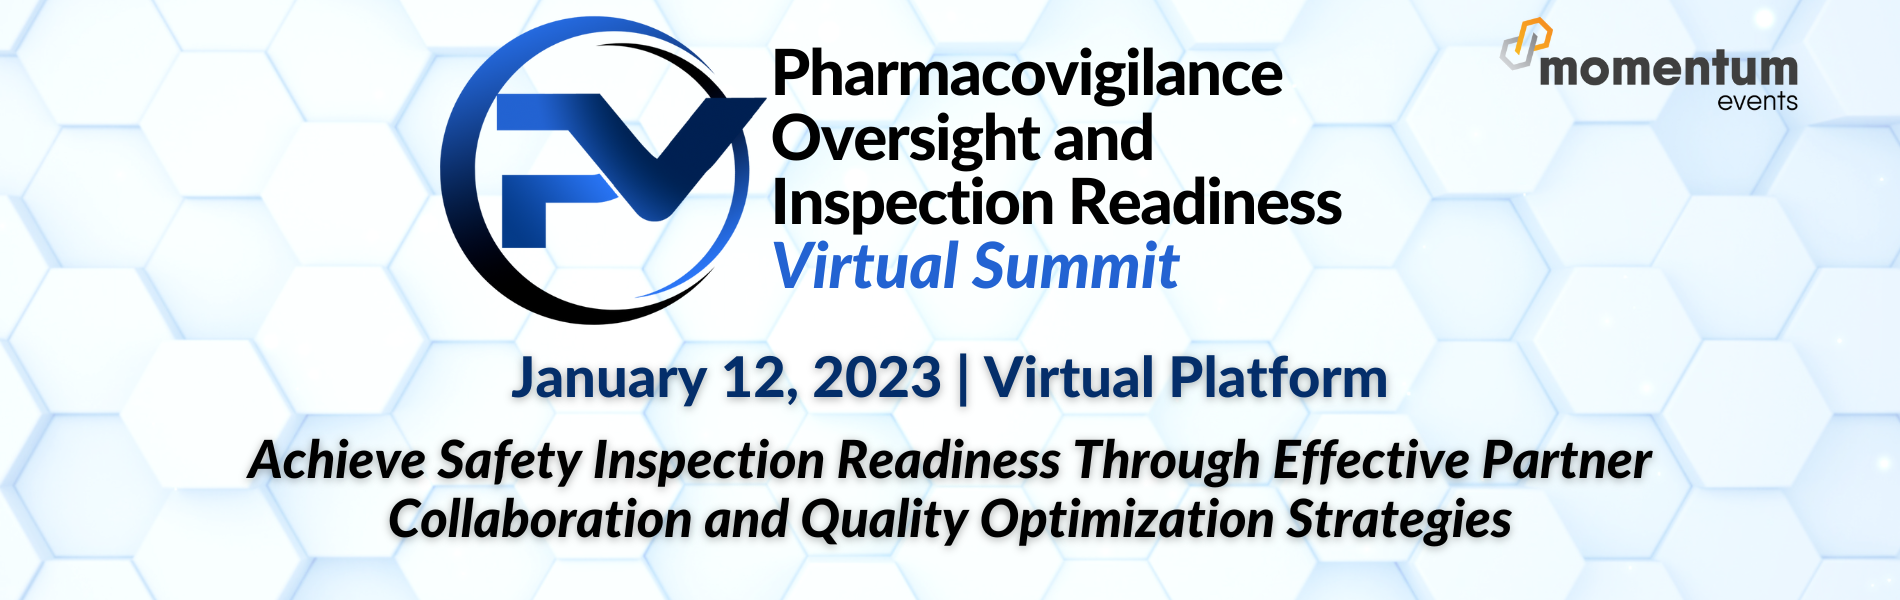 Banner for Pharmacovigilance Oversight and Inspection Readiness Virtual Summit